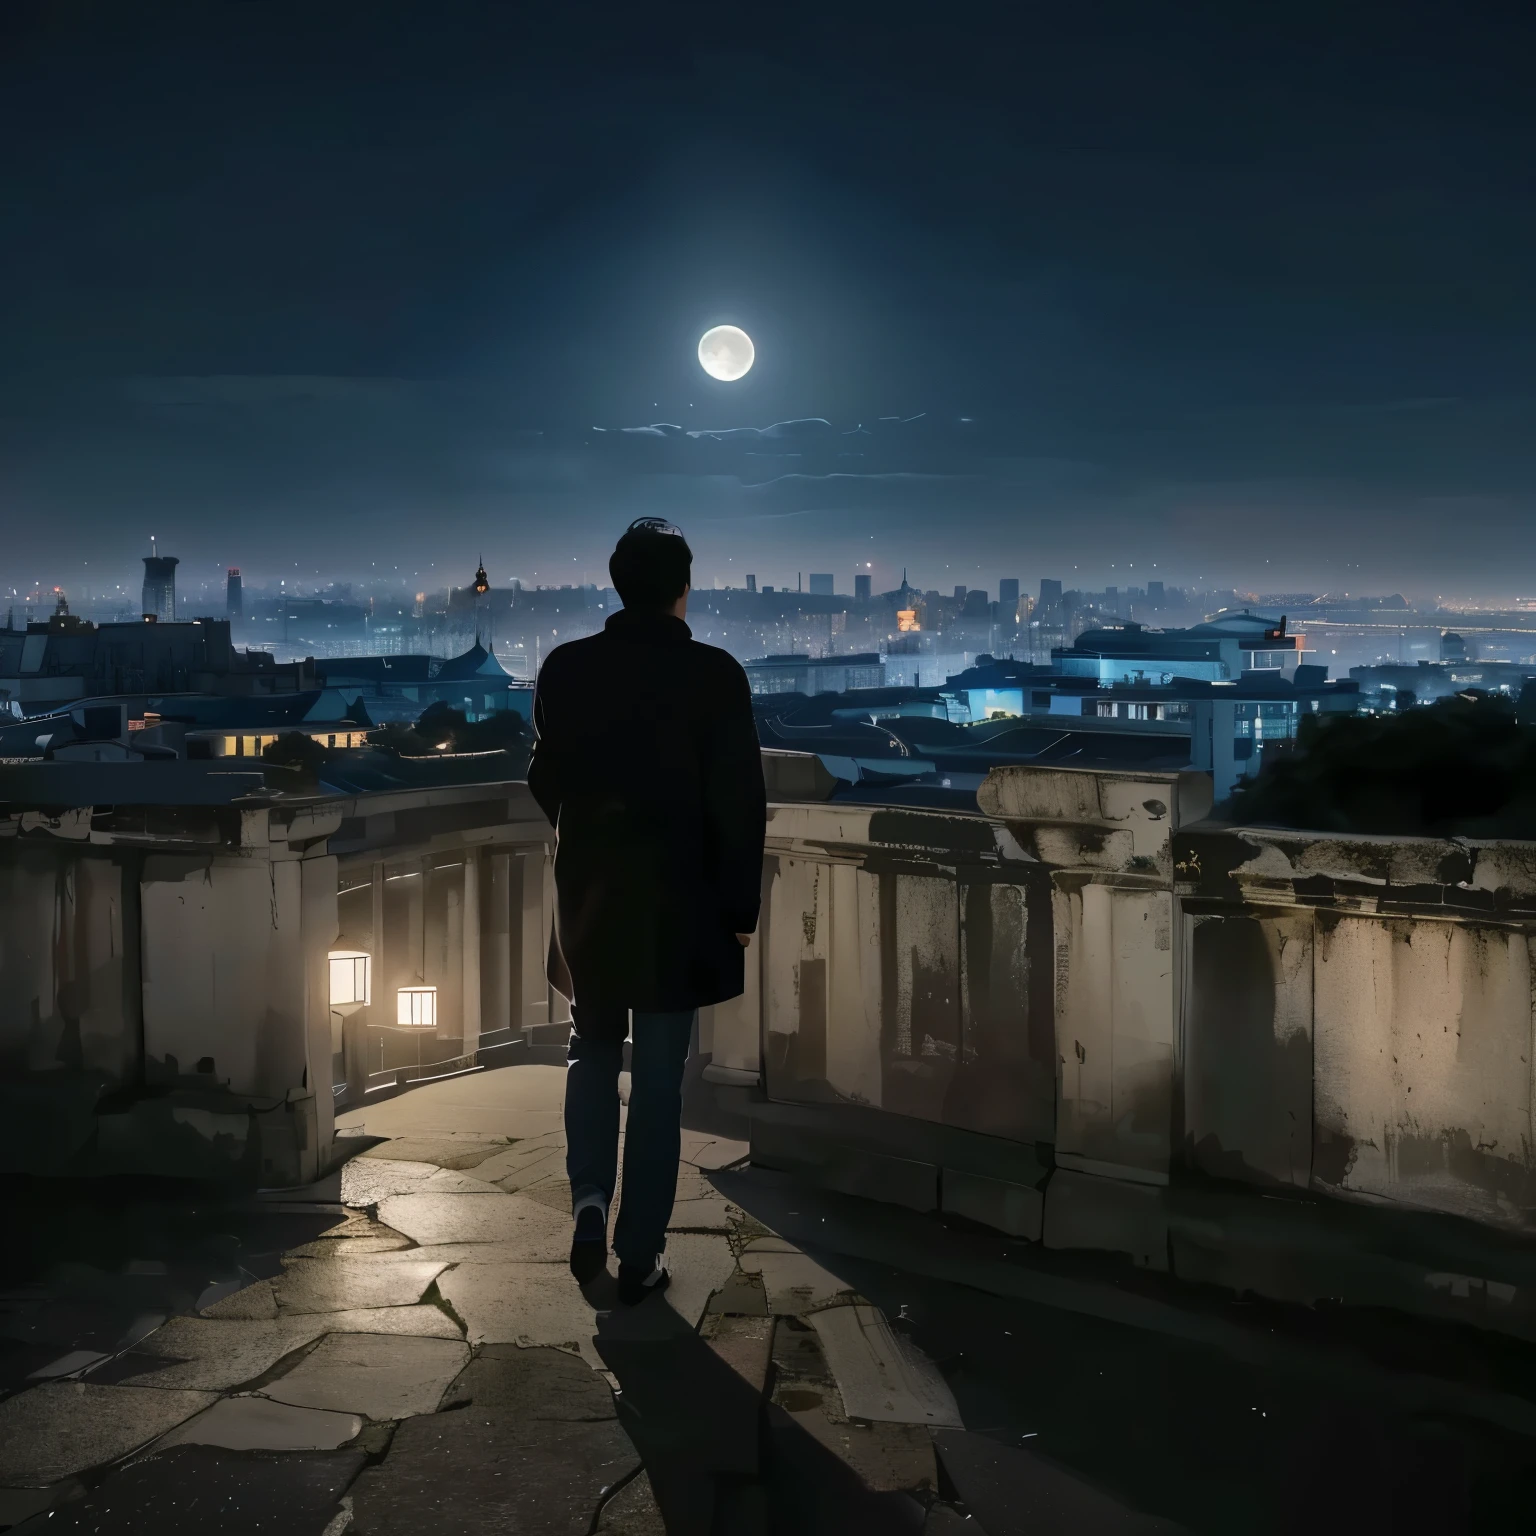 a man mature with dedicated hair standing on a ledge looking at the city at night, looking at the full moon, looking at the moon, moon behind him, looking at the city, the moon cast on the man, looking over city, at night with full moon, overlooking a modern city, walking towards the full moon, the moon is big an in the city. In the scene of China city 